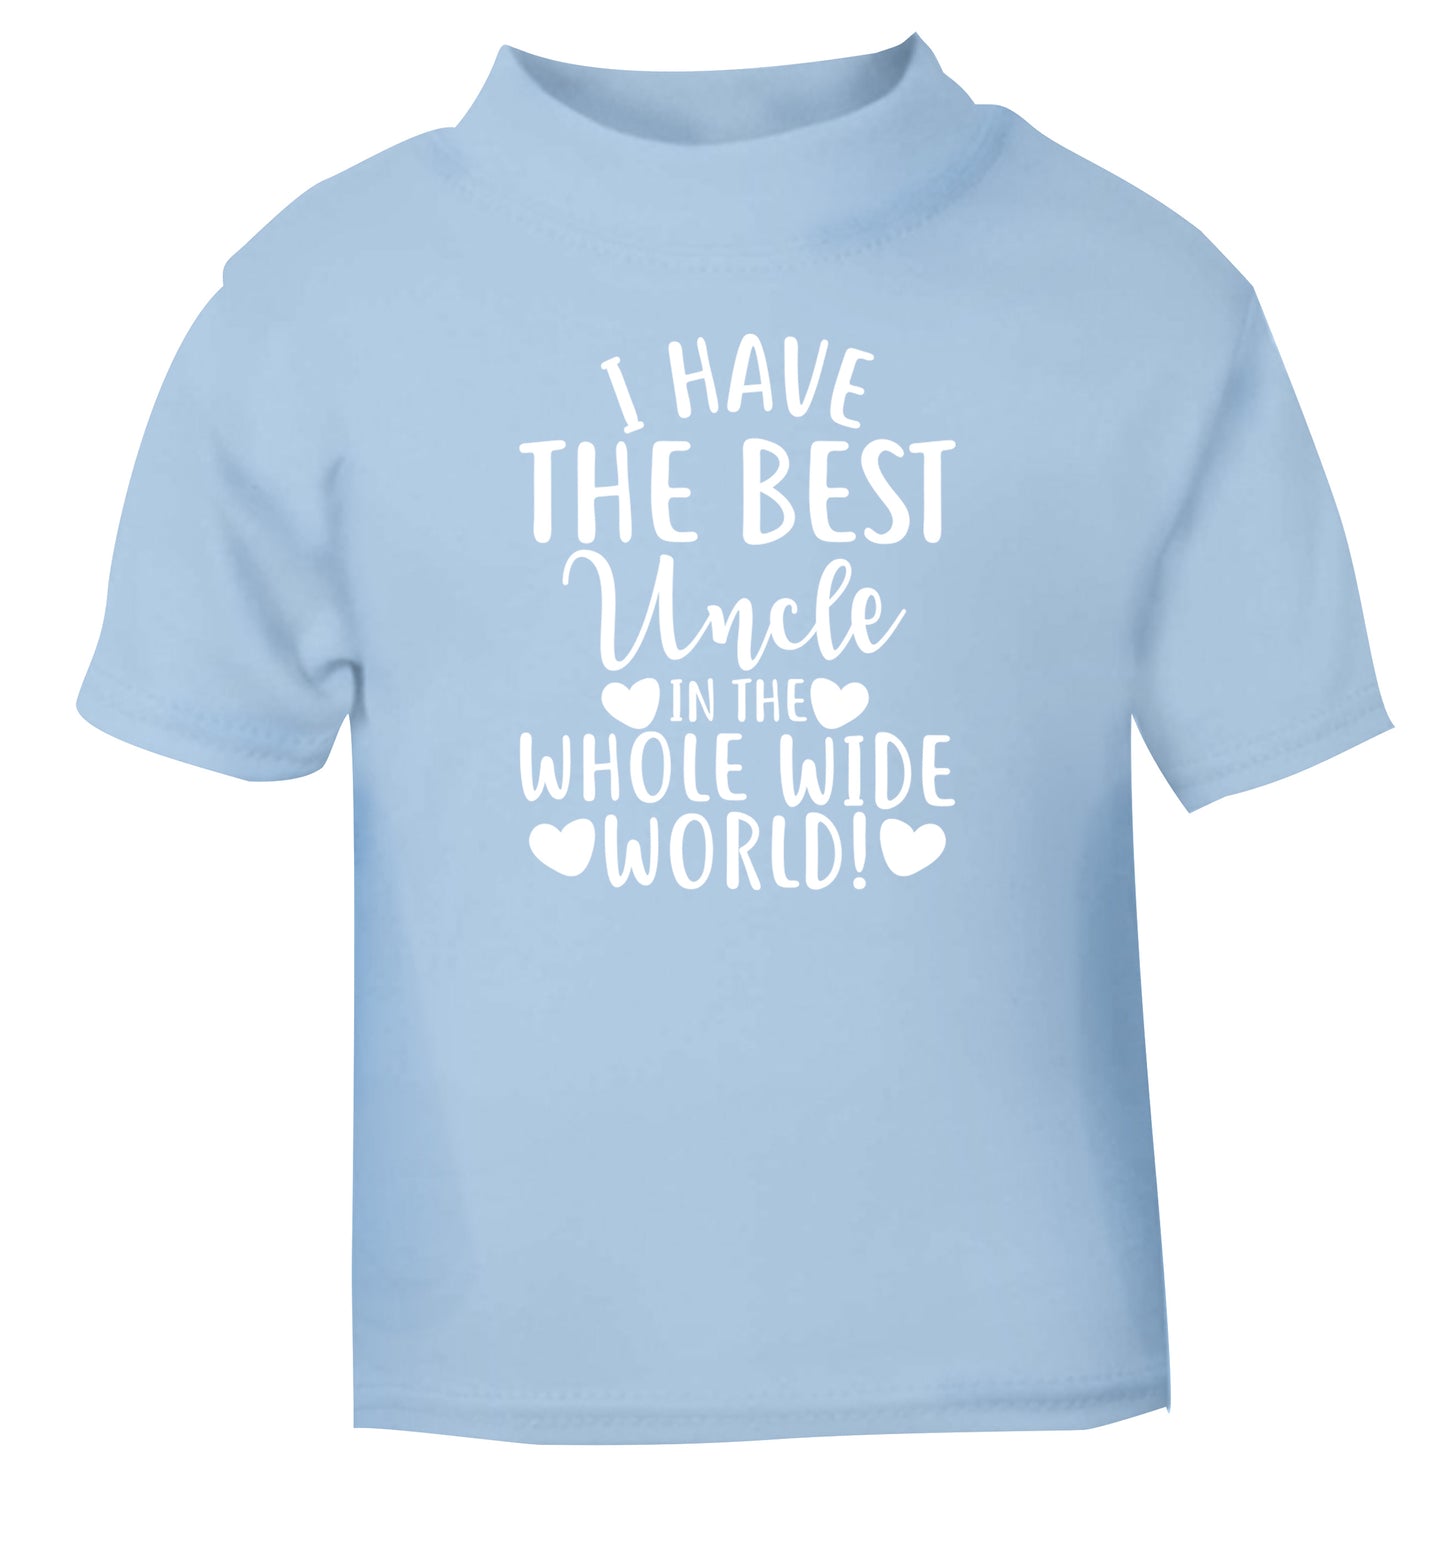 I have the best uncle in the whole wide world! light blue Baby Toddler Tshirt 2 Years